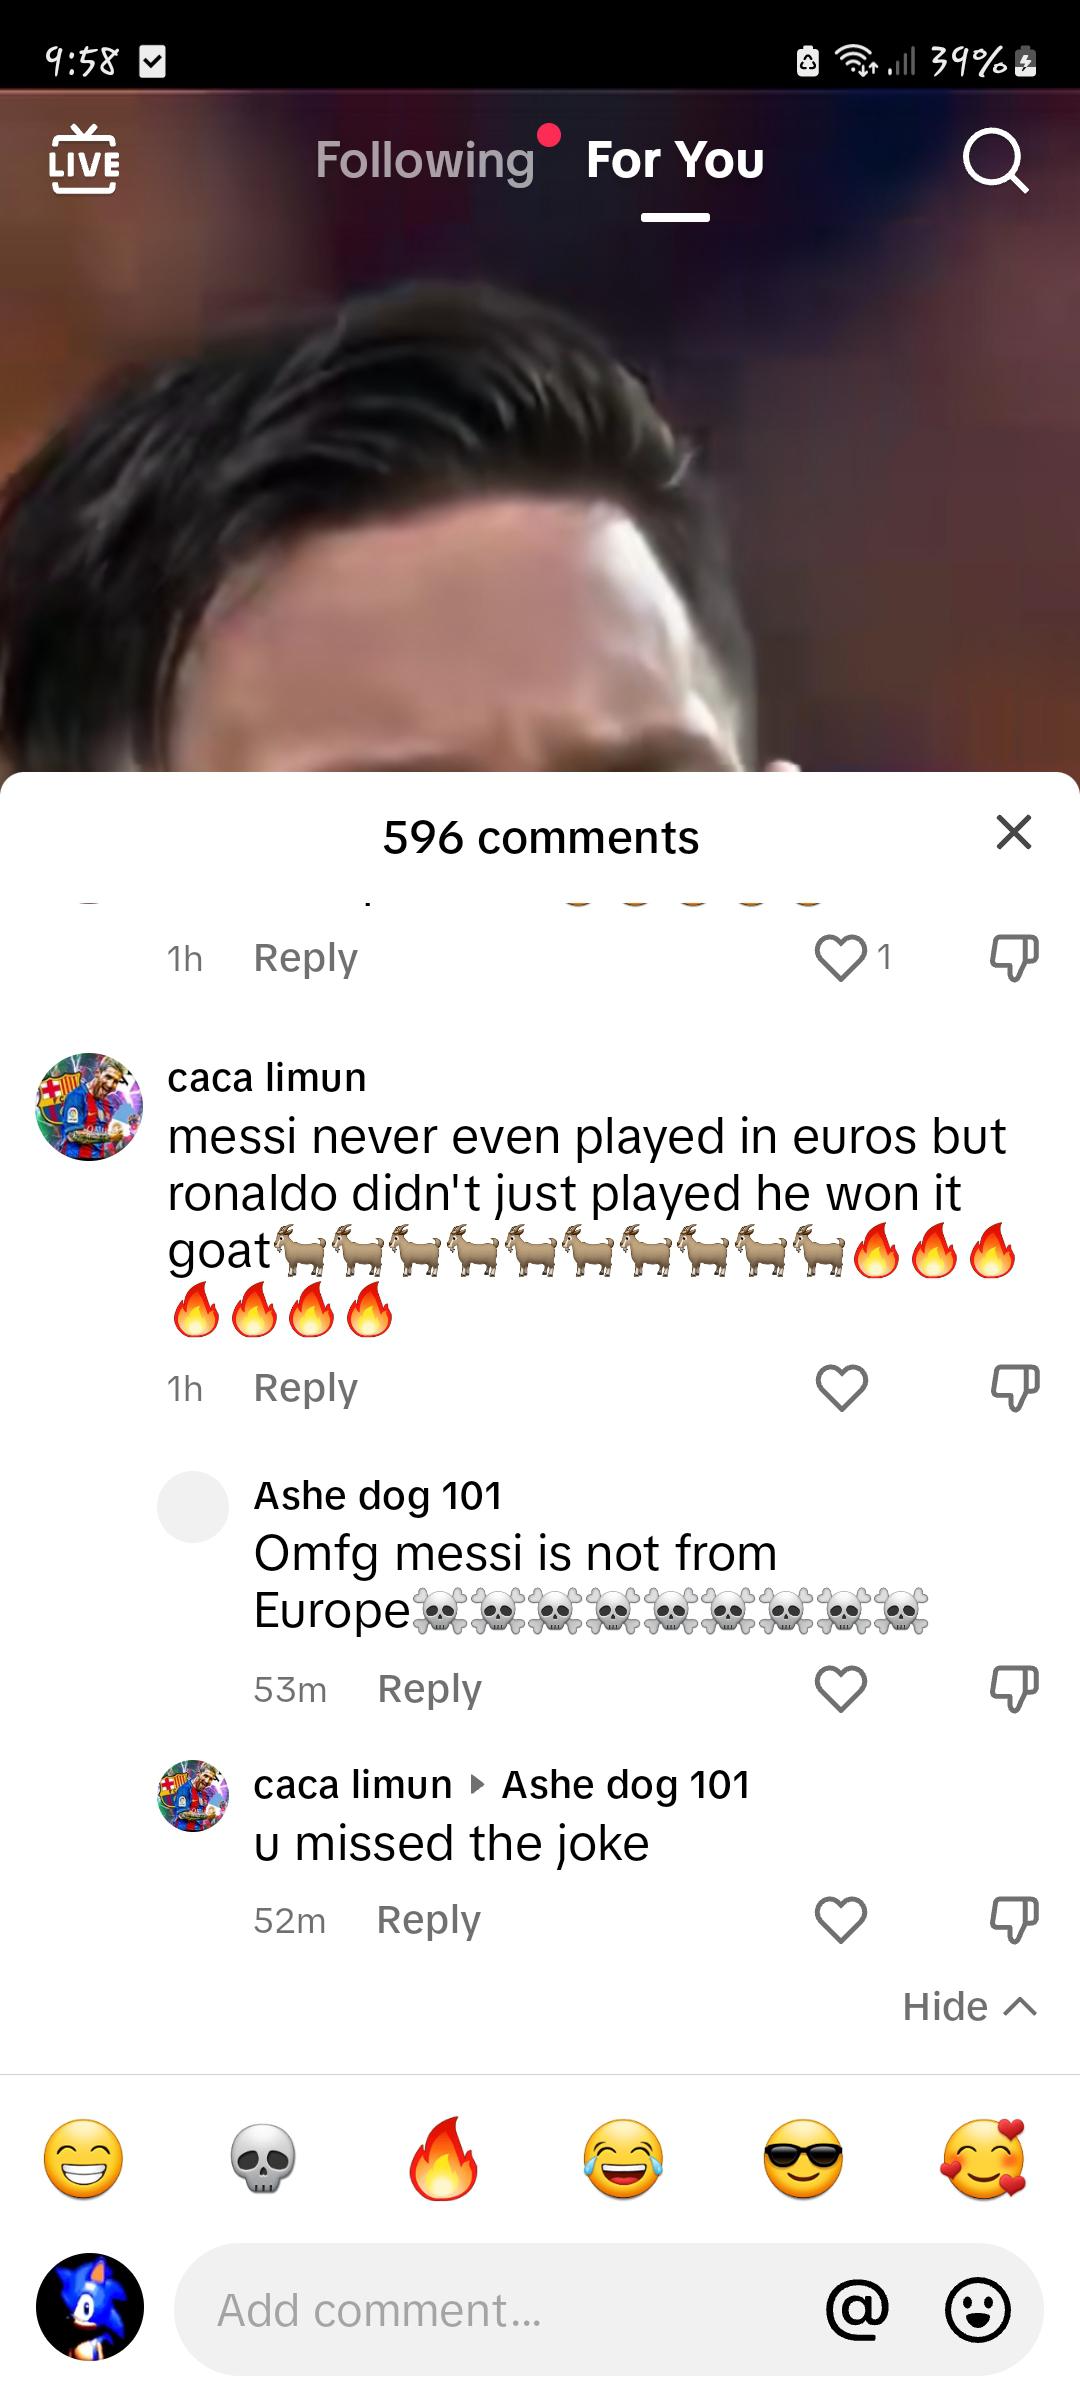 people who missed the joke - screenshot - Live D ing For You 1h 596 1h Ashe dog 101 Omfg messi is not from Europe es gorg 53m caca limun Ashe dog 101 u missed the joke 52m 23 Add comment... ..|| 39% caca limun messi never even played in euros but ronaldo 